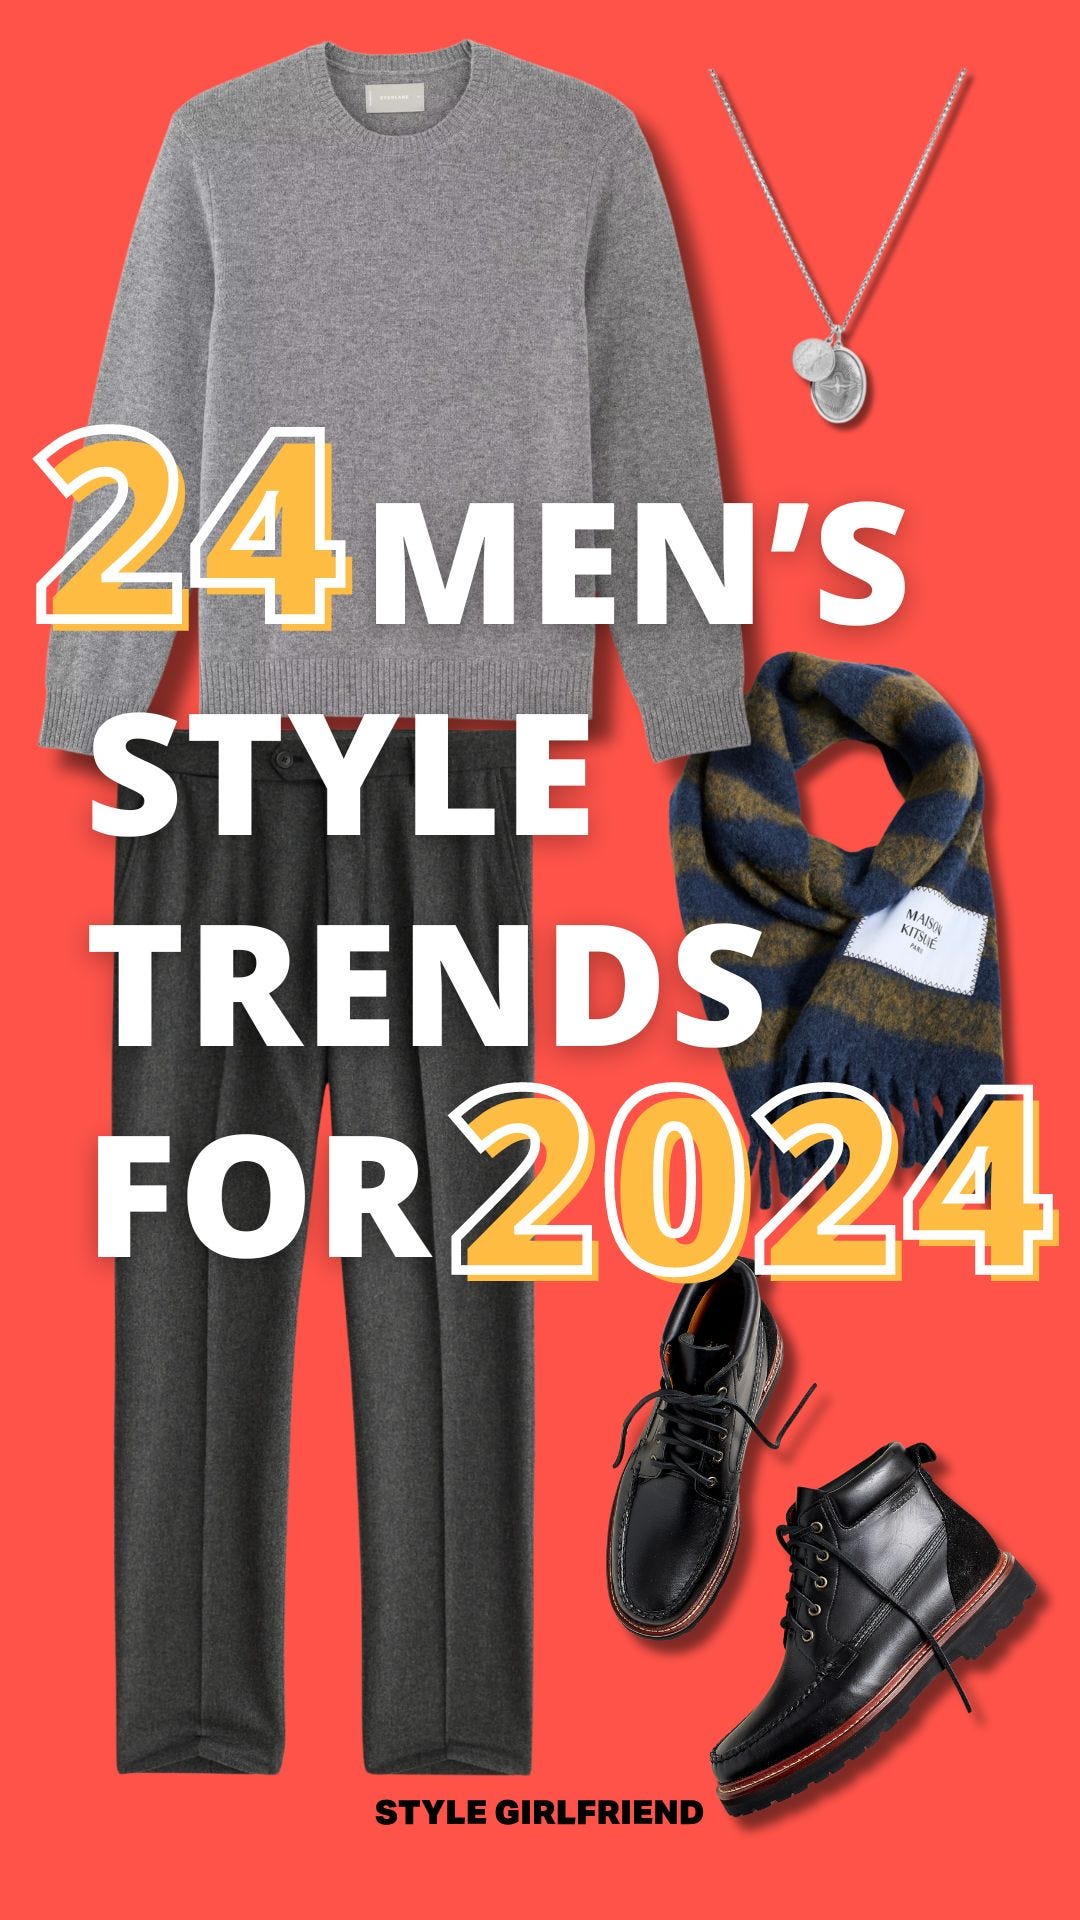 Men's Fashion Trends 2023: 13 Massive Menswear Moves to Make This Year